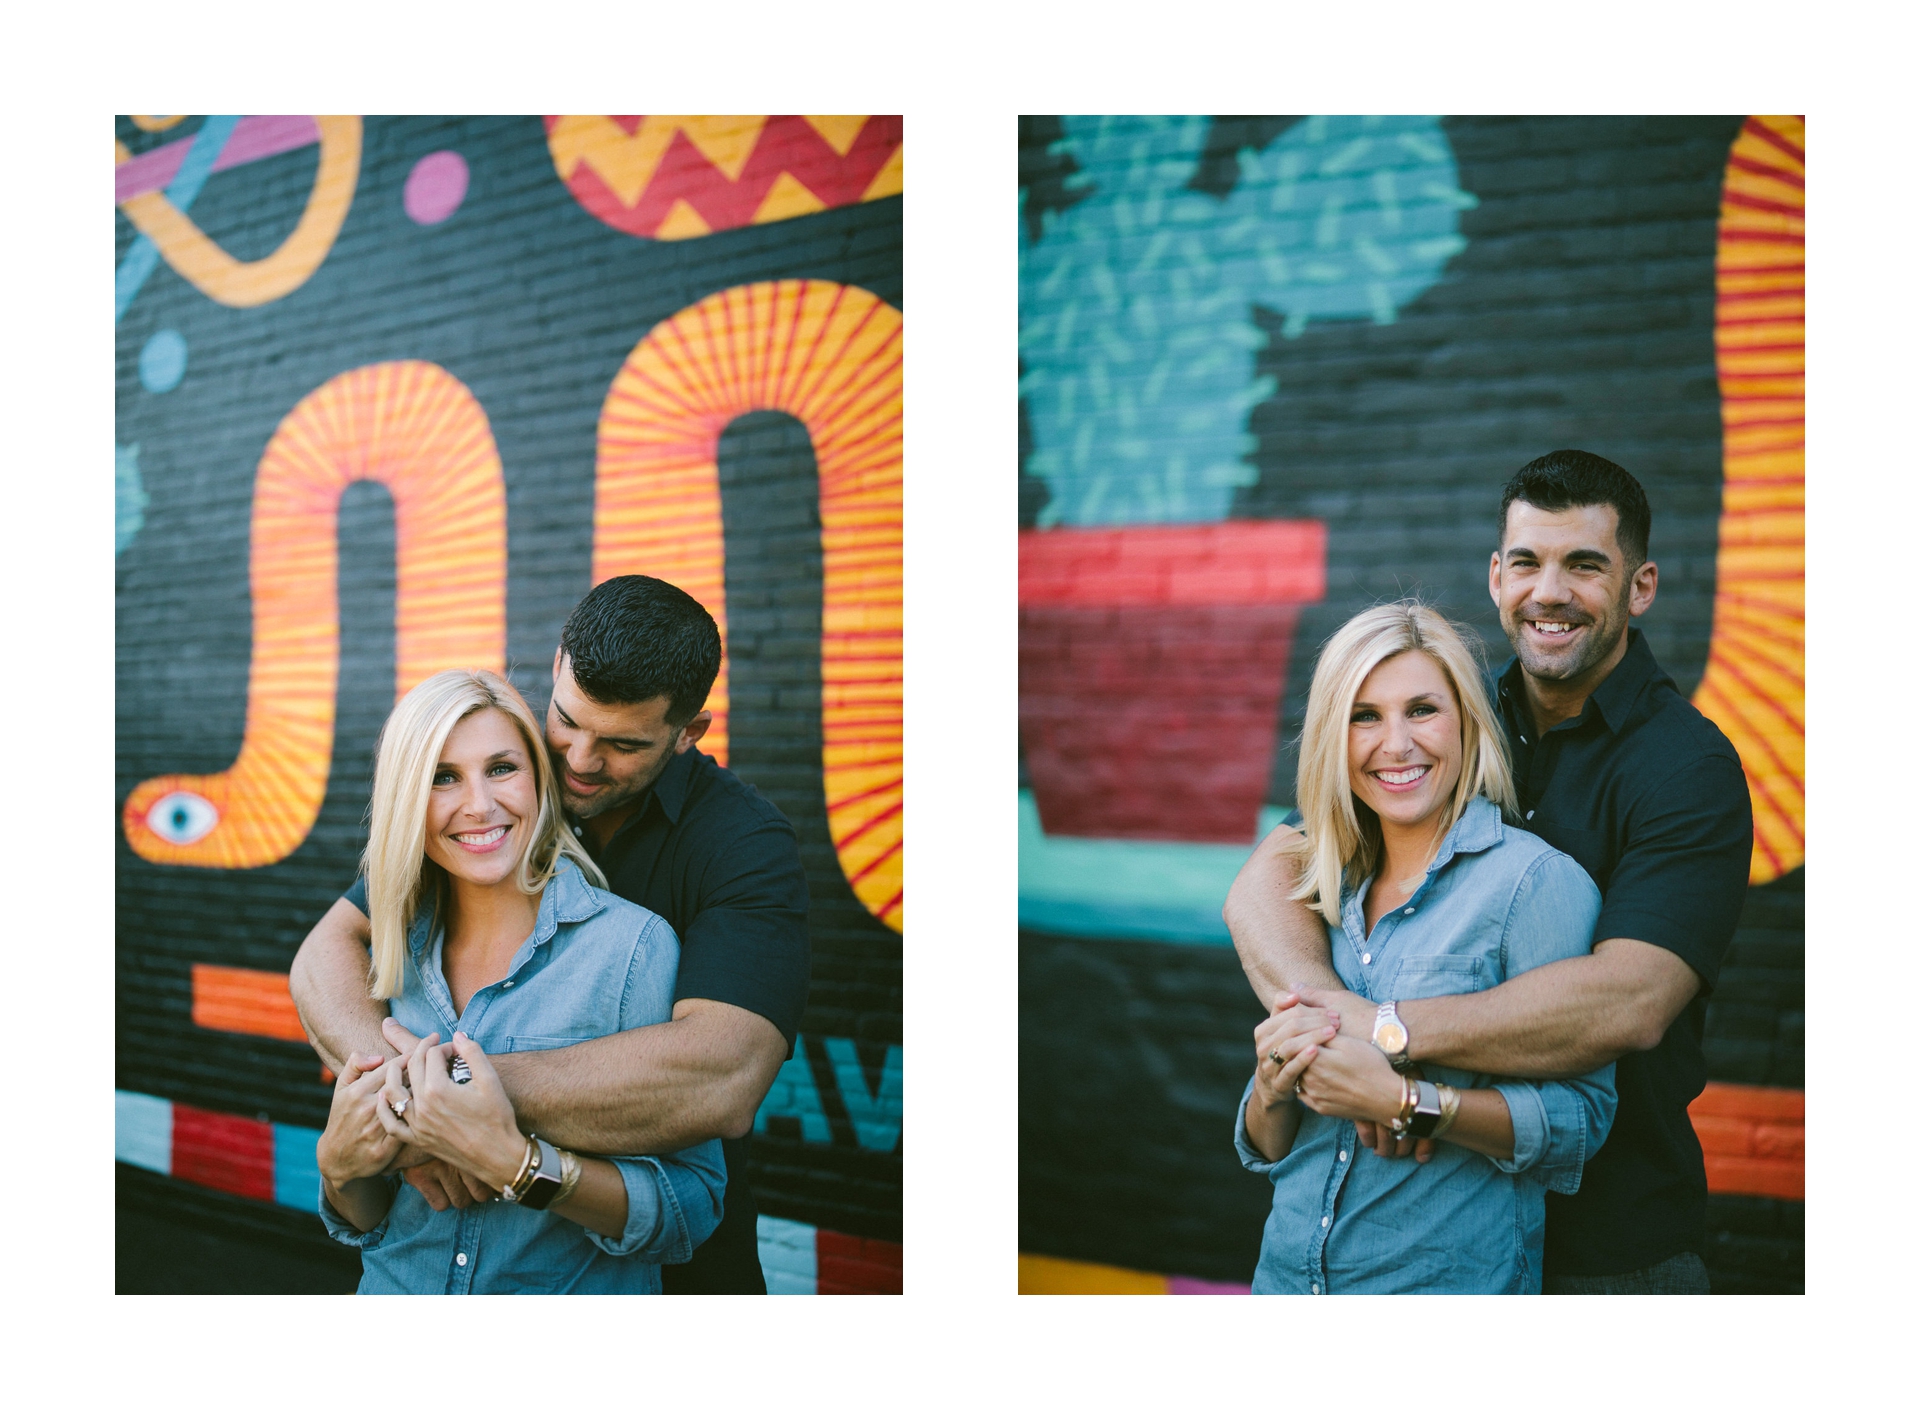 Sara Shookman Angelo DiFranco Engagement photos in cleveland by too much awesomeness photography 13.jpg